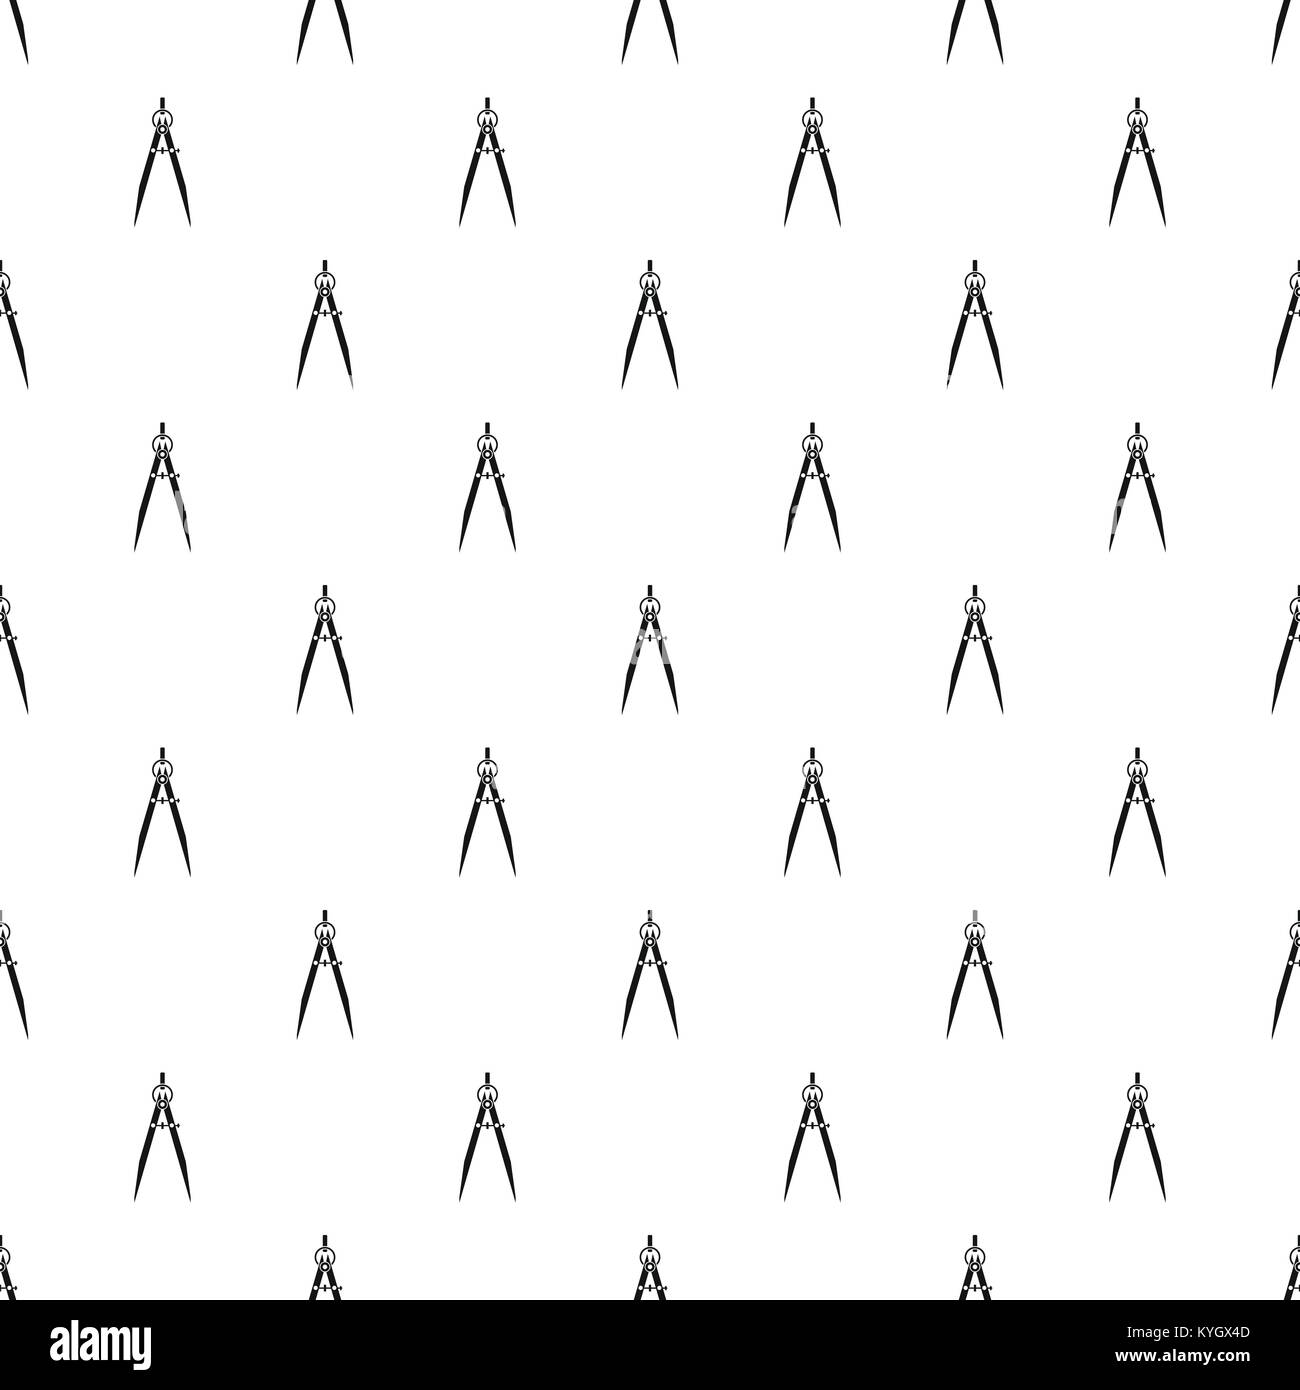 Compass for drawing and delineation pattern vector Stock Vector